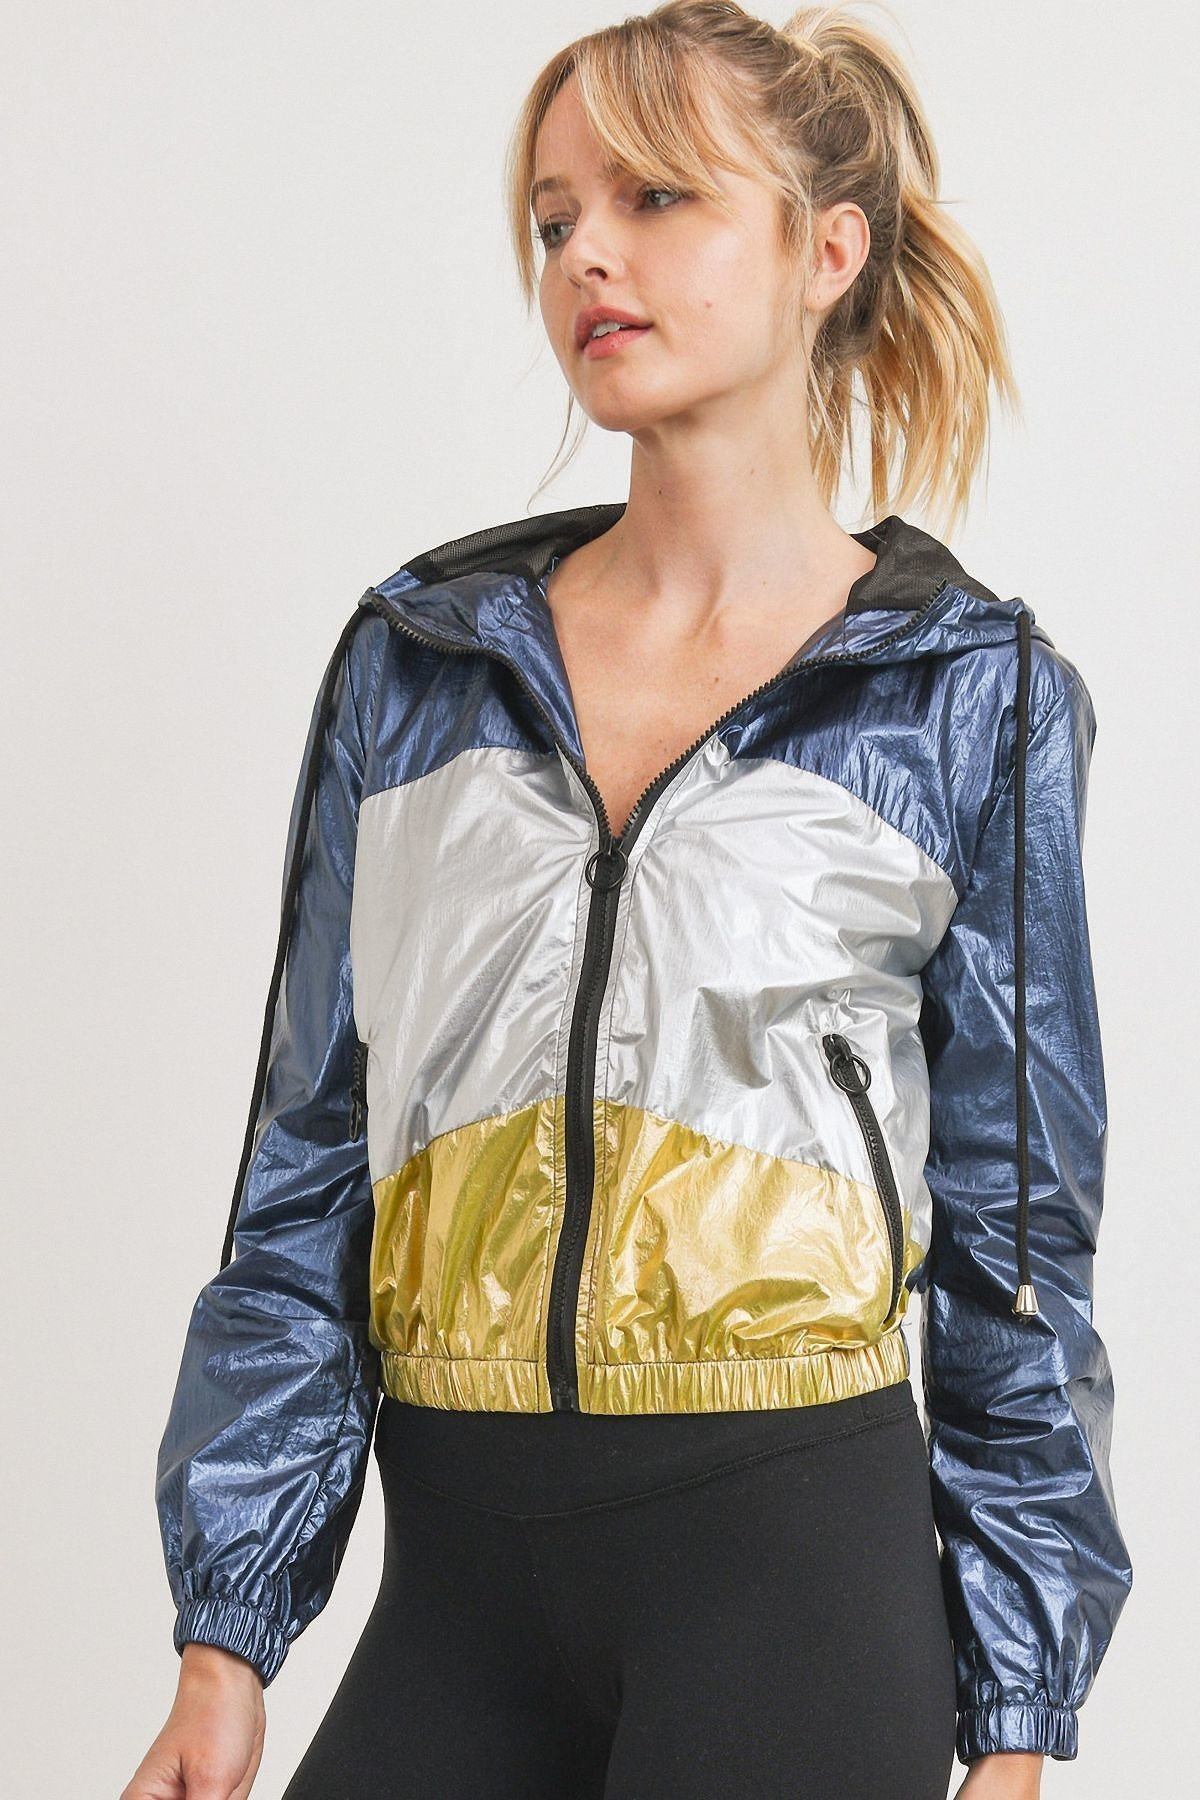 Marylyn Marvelous 100% Polyester Navy/Silver/Gold Metallic Colorblock Hoodie Jacket